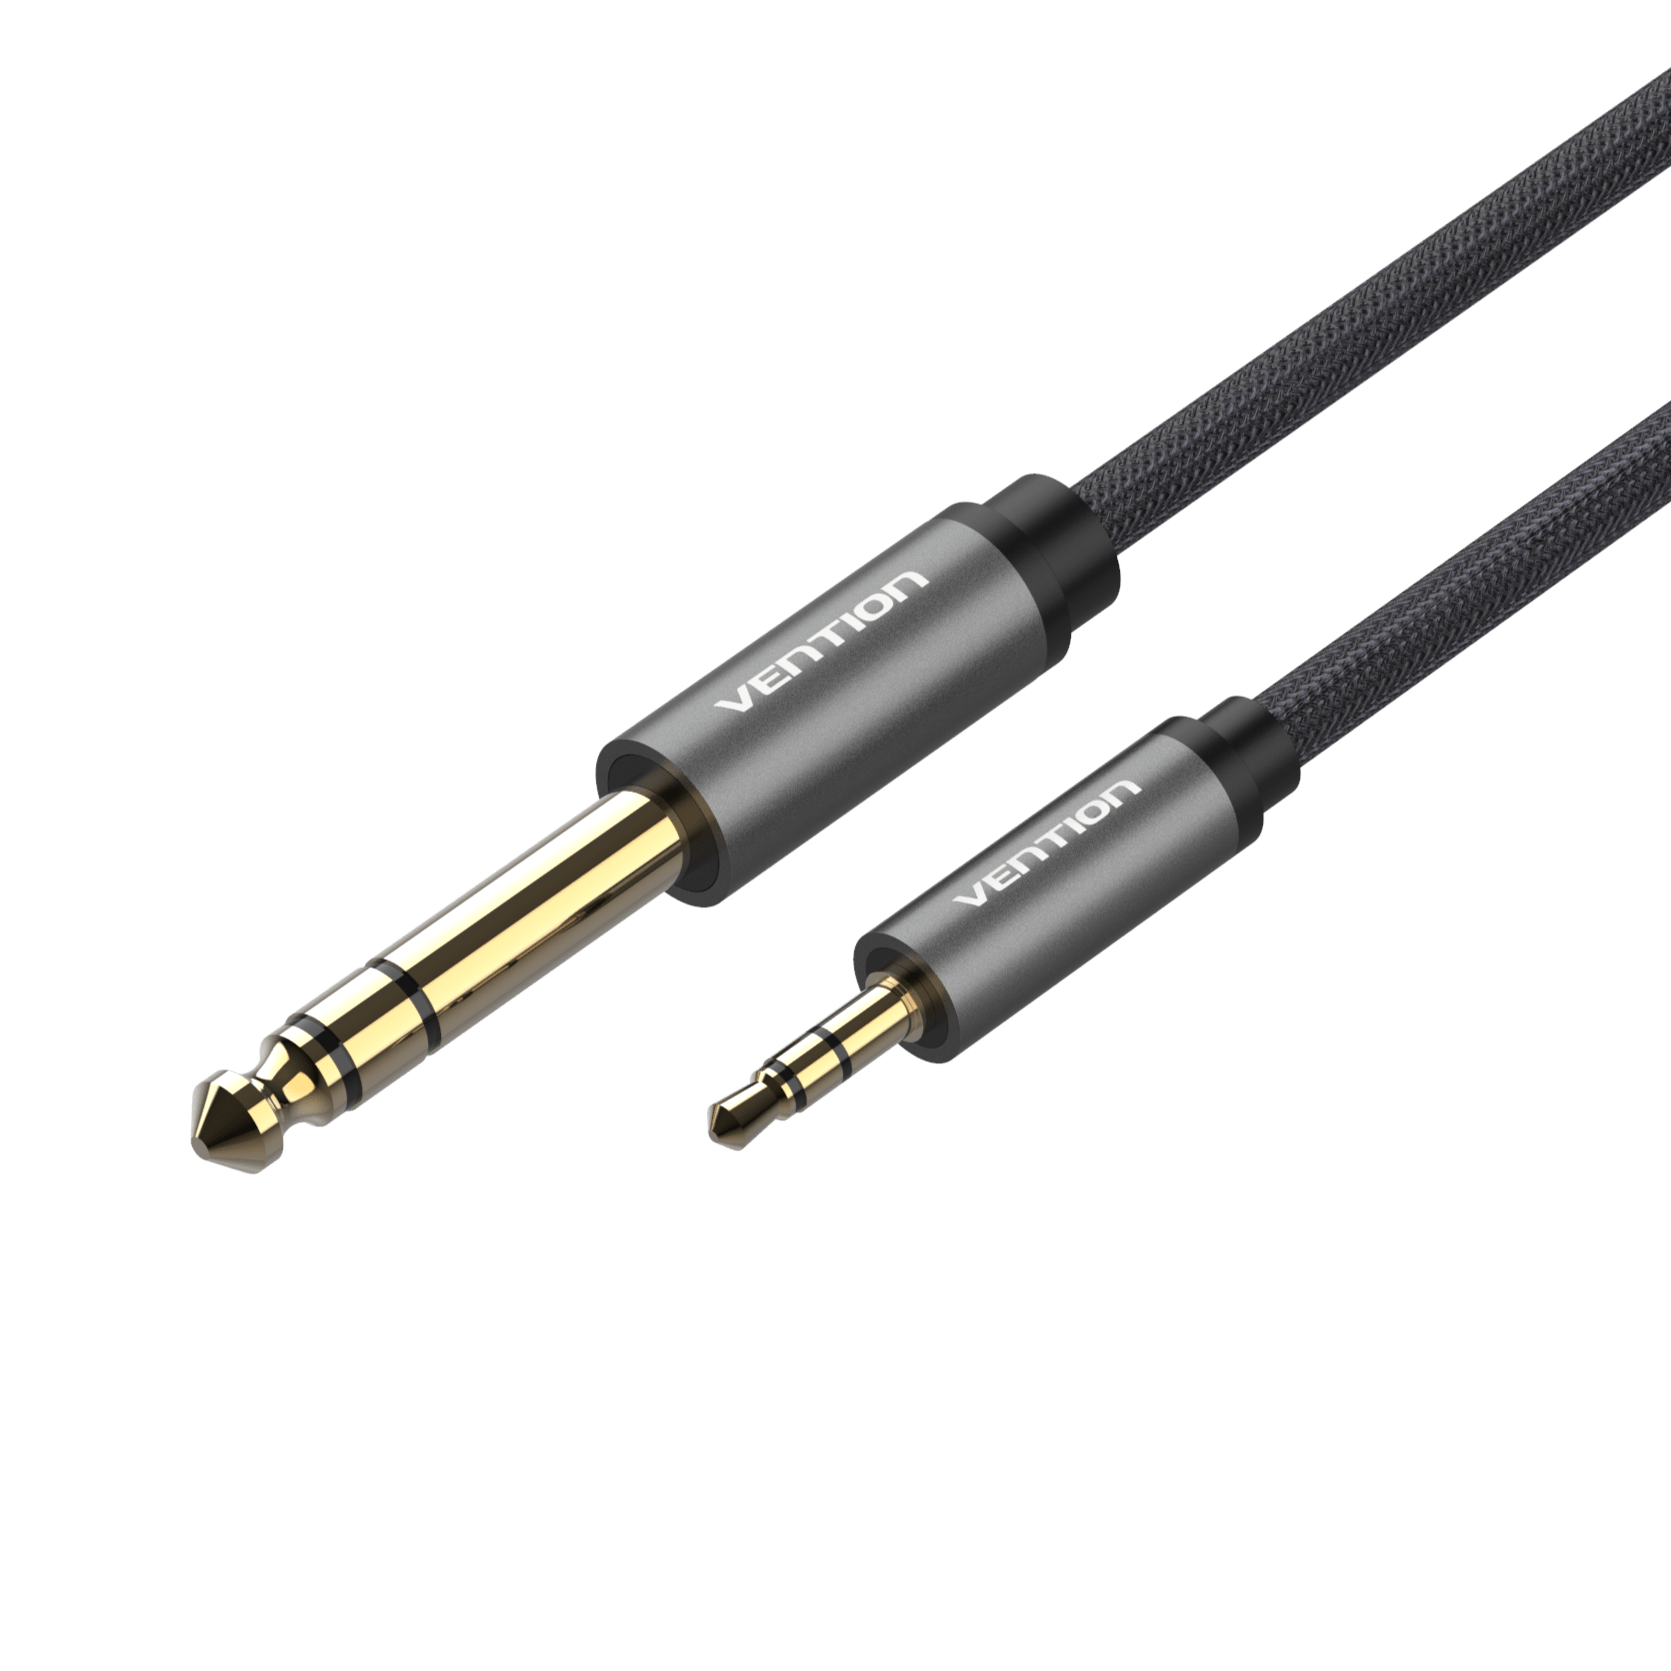 2x Jack 3.5mm To 6.35 Adapter Audio Cable For Mixer Amplifier